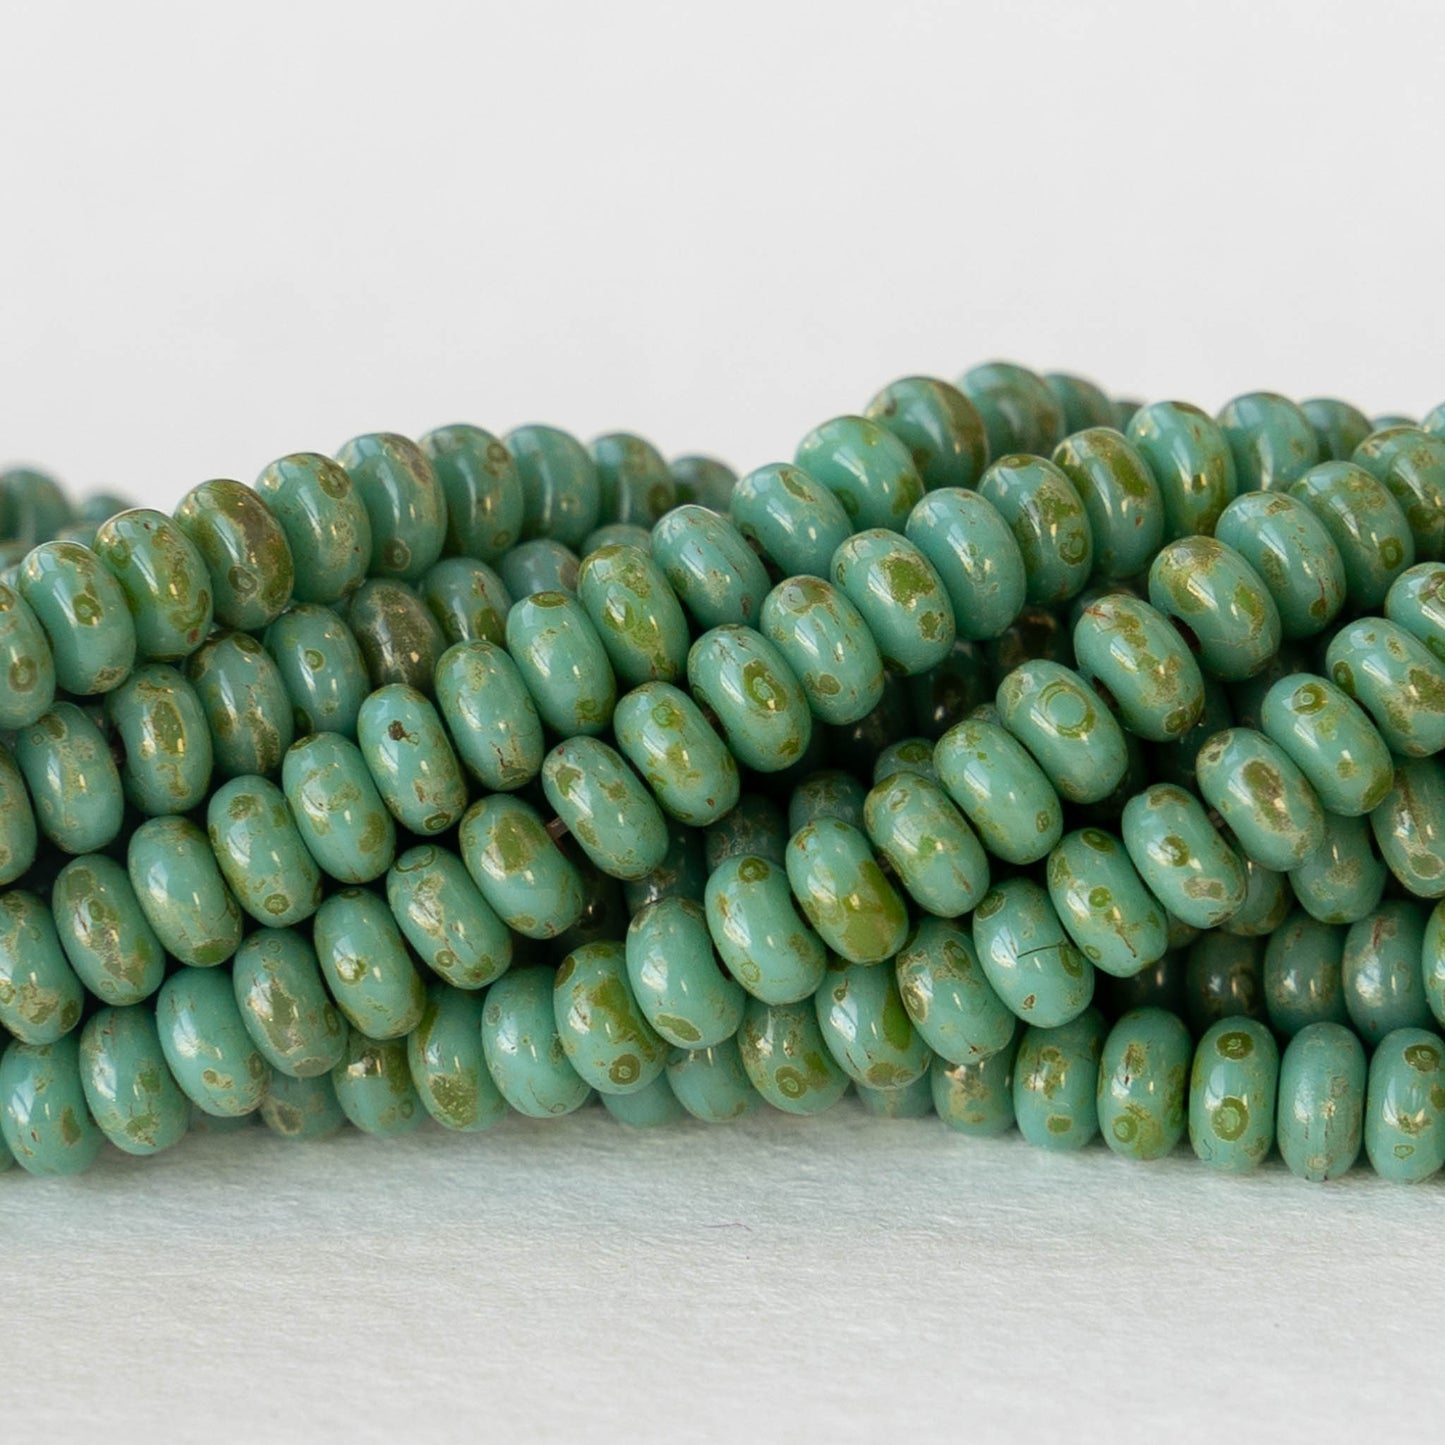 3mm Rondelle Beads -Turquoise Picasso - 100 Beads